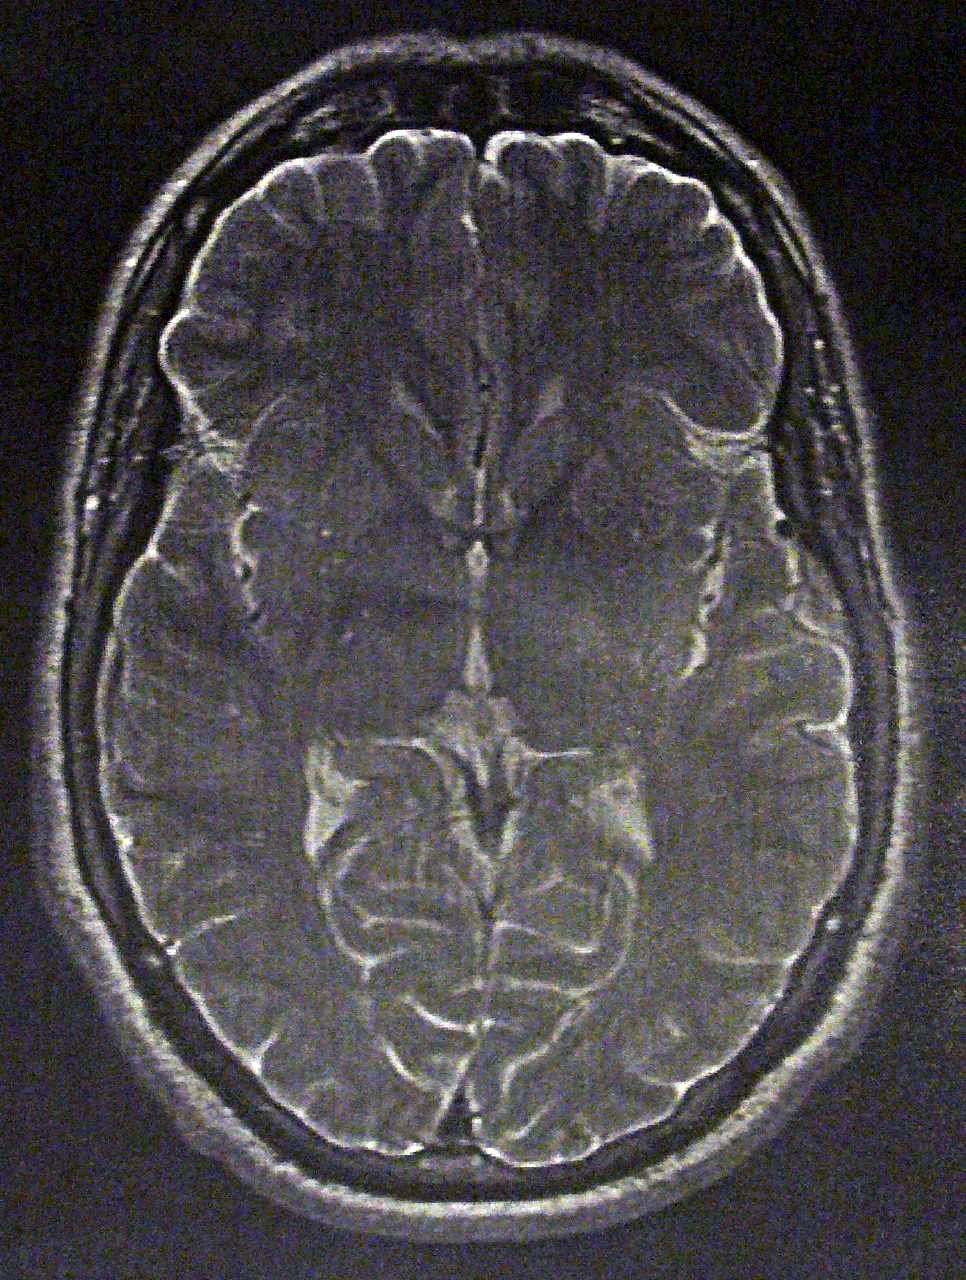 Pic: Proof brain - Andy Powell (Flickr)